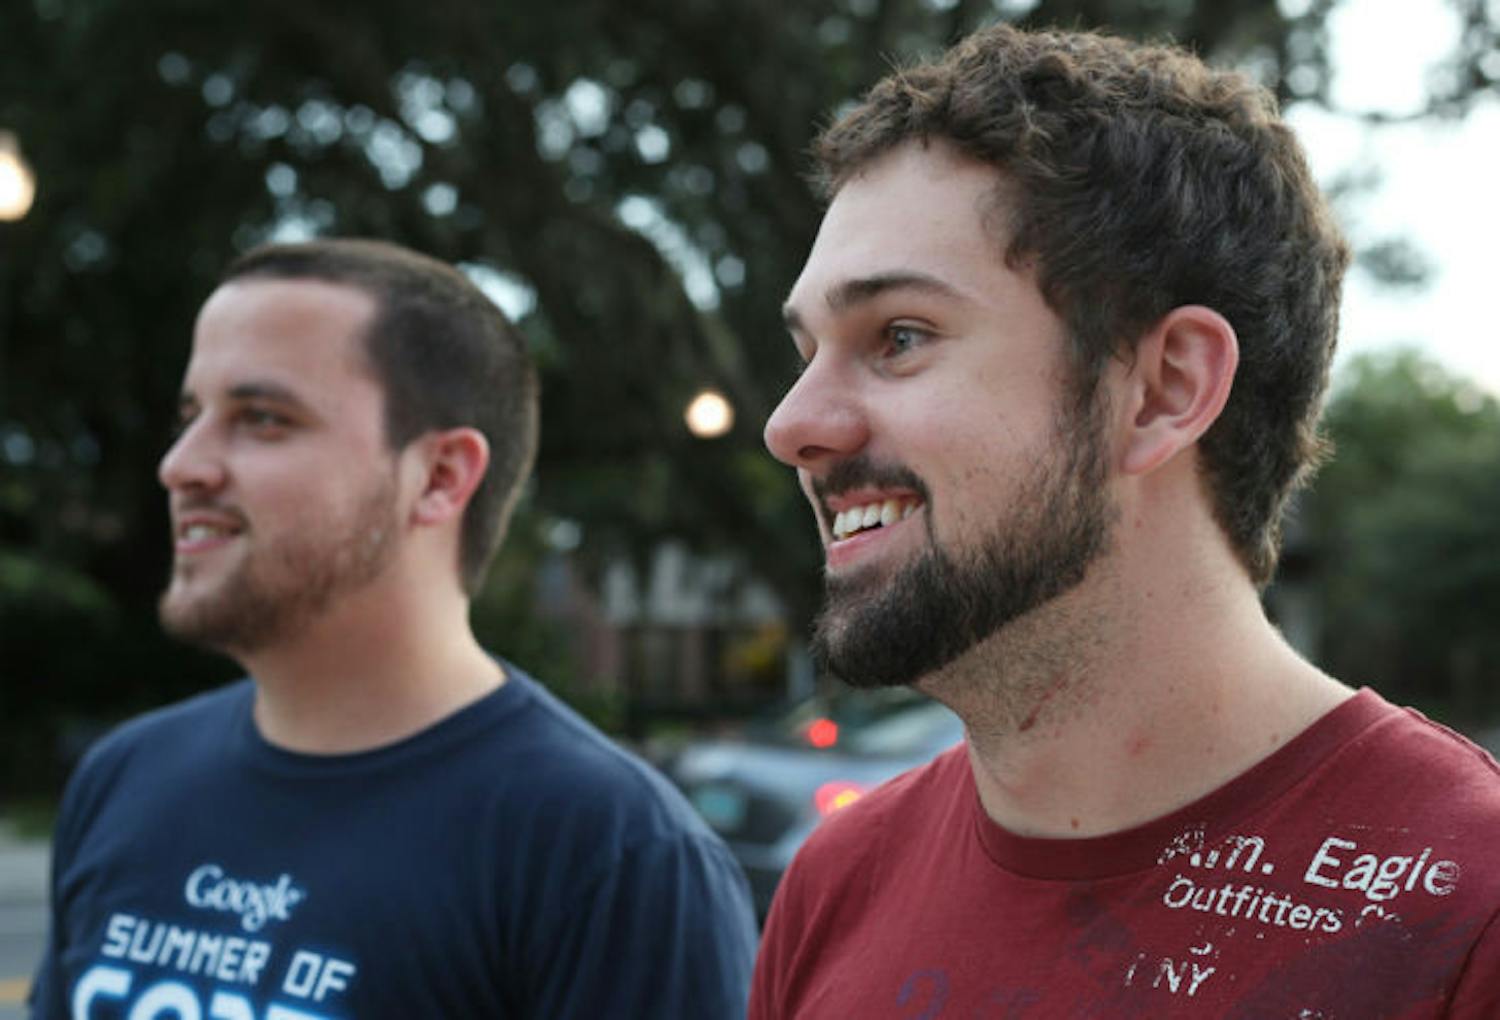 UF aerospace engineering seniors Lee Jones, 23, and Ernesto Aneiros, 23, both sport beards. A significant drop in razor sales has been reported as facial hair becomes more of a trend.